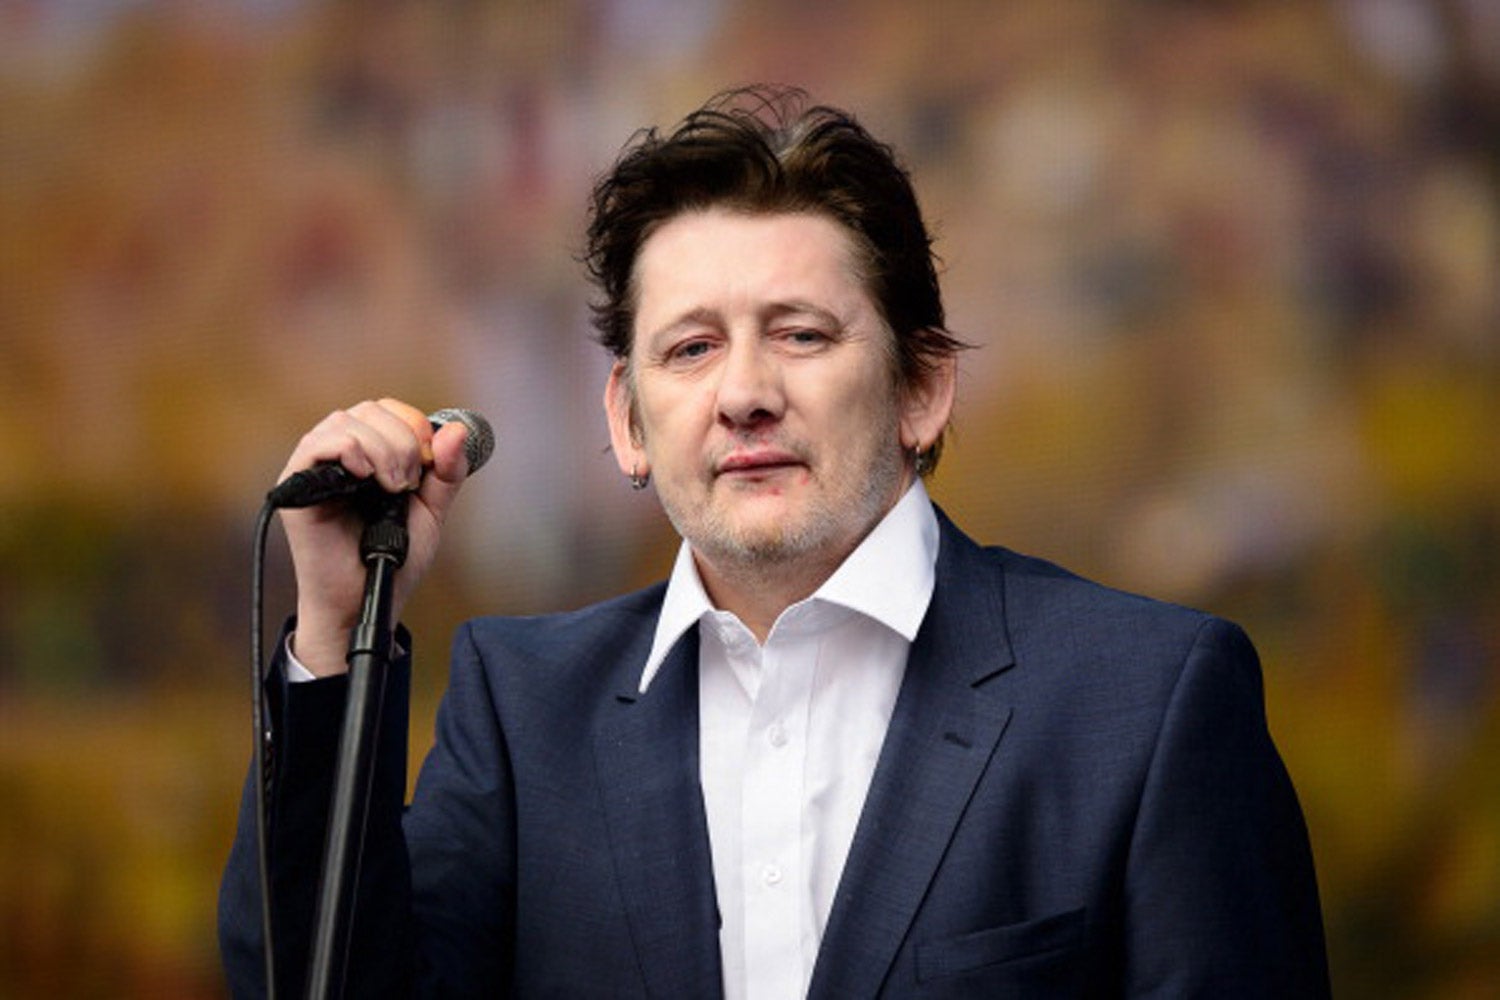 Shane macgowan pogues live shows today